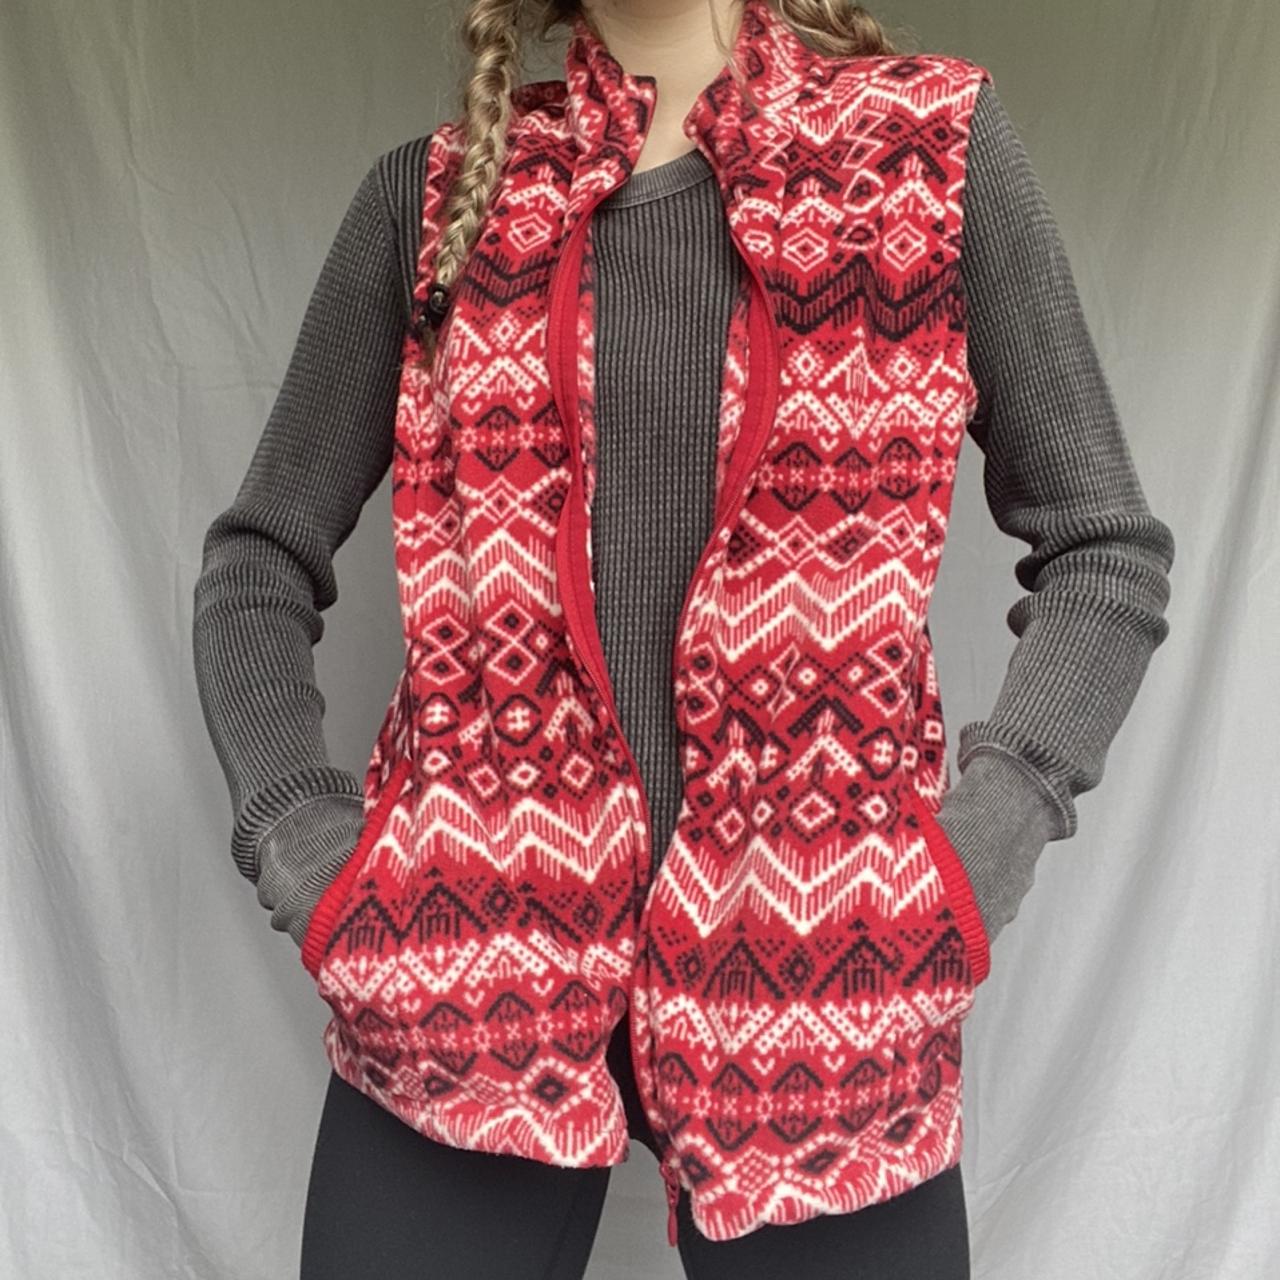 Basic Editions Women's Red and White Gilet